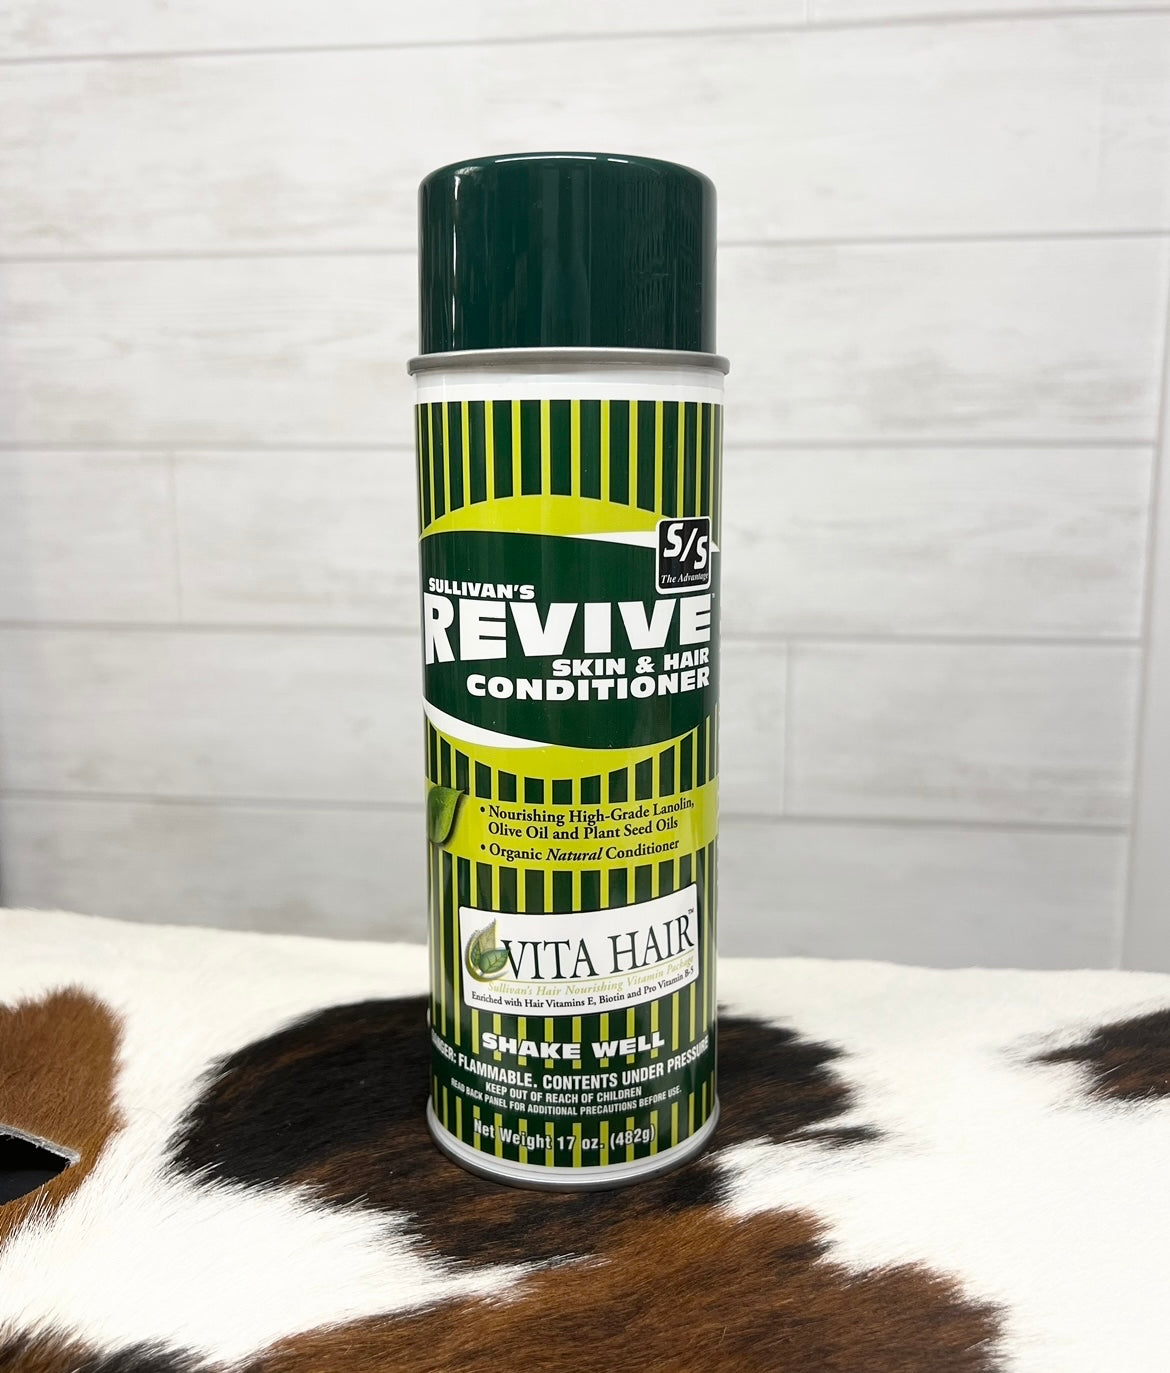 Revive Skin & Hair Conditioner